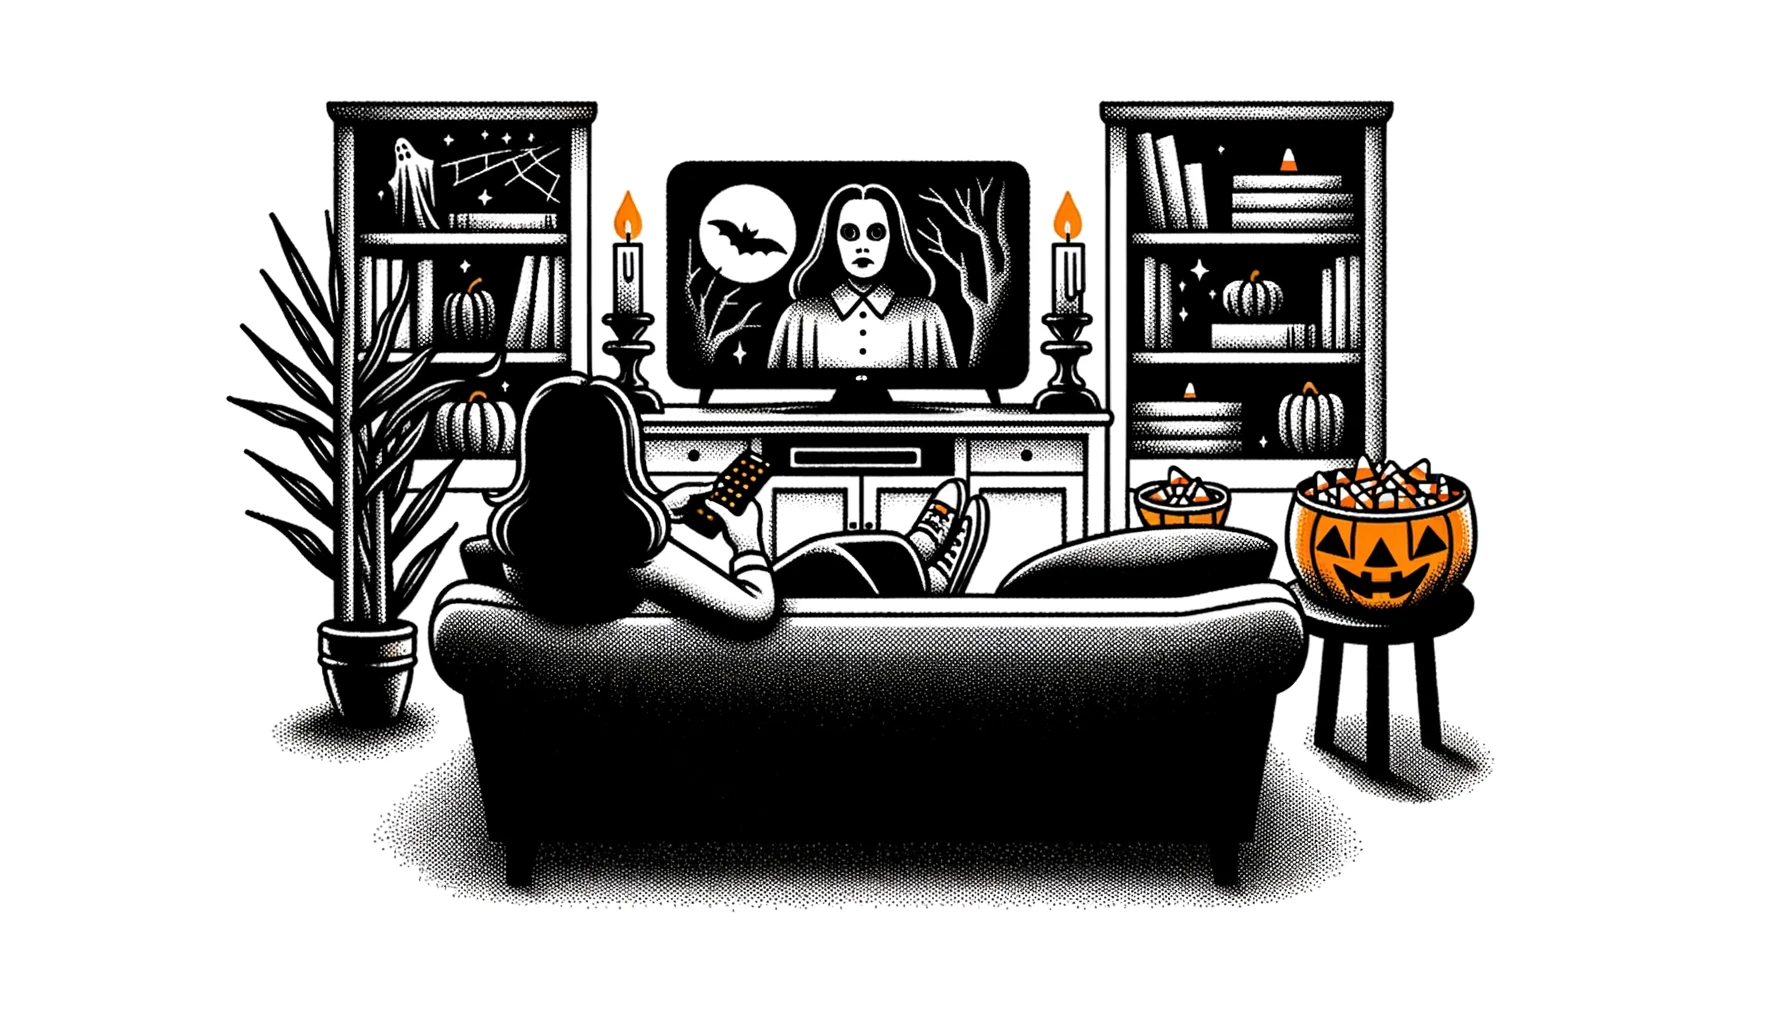 Illustration on a white background, consistent with the style of the second image: A woman sits on a couch, engrossed in a classic horror film on TV. The room is dimly lit with Halloween-themed candles, and a bowl of candy corn rests on the coffee table.